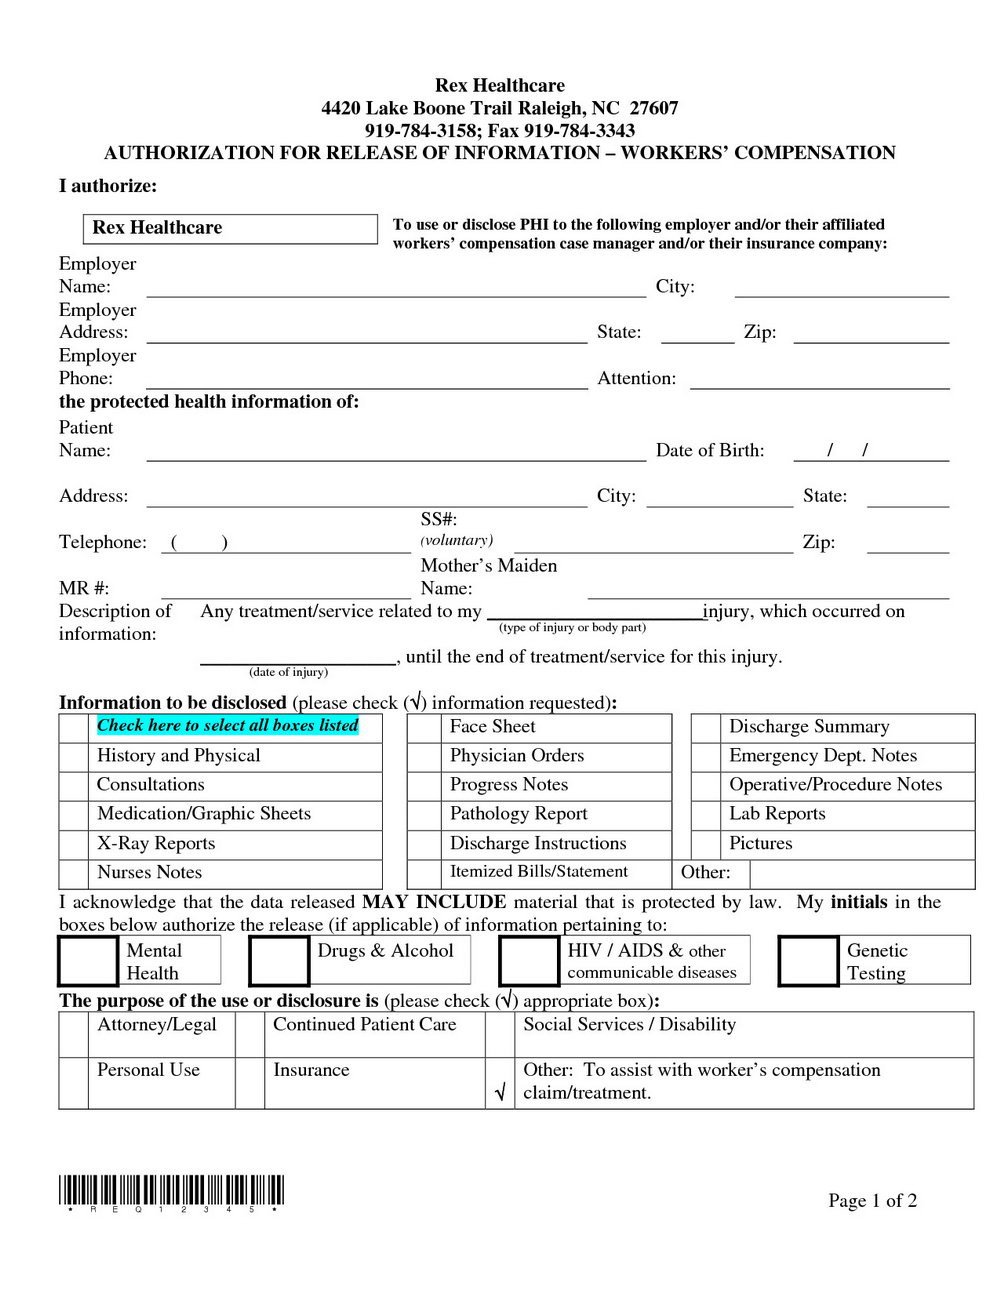 Workers Comp Exemption form Michigan Workers Pensation Waiver form for Independent